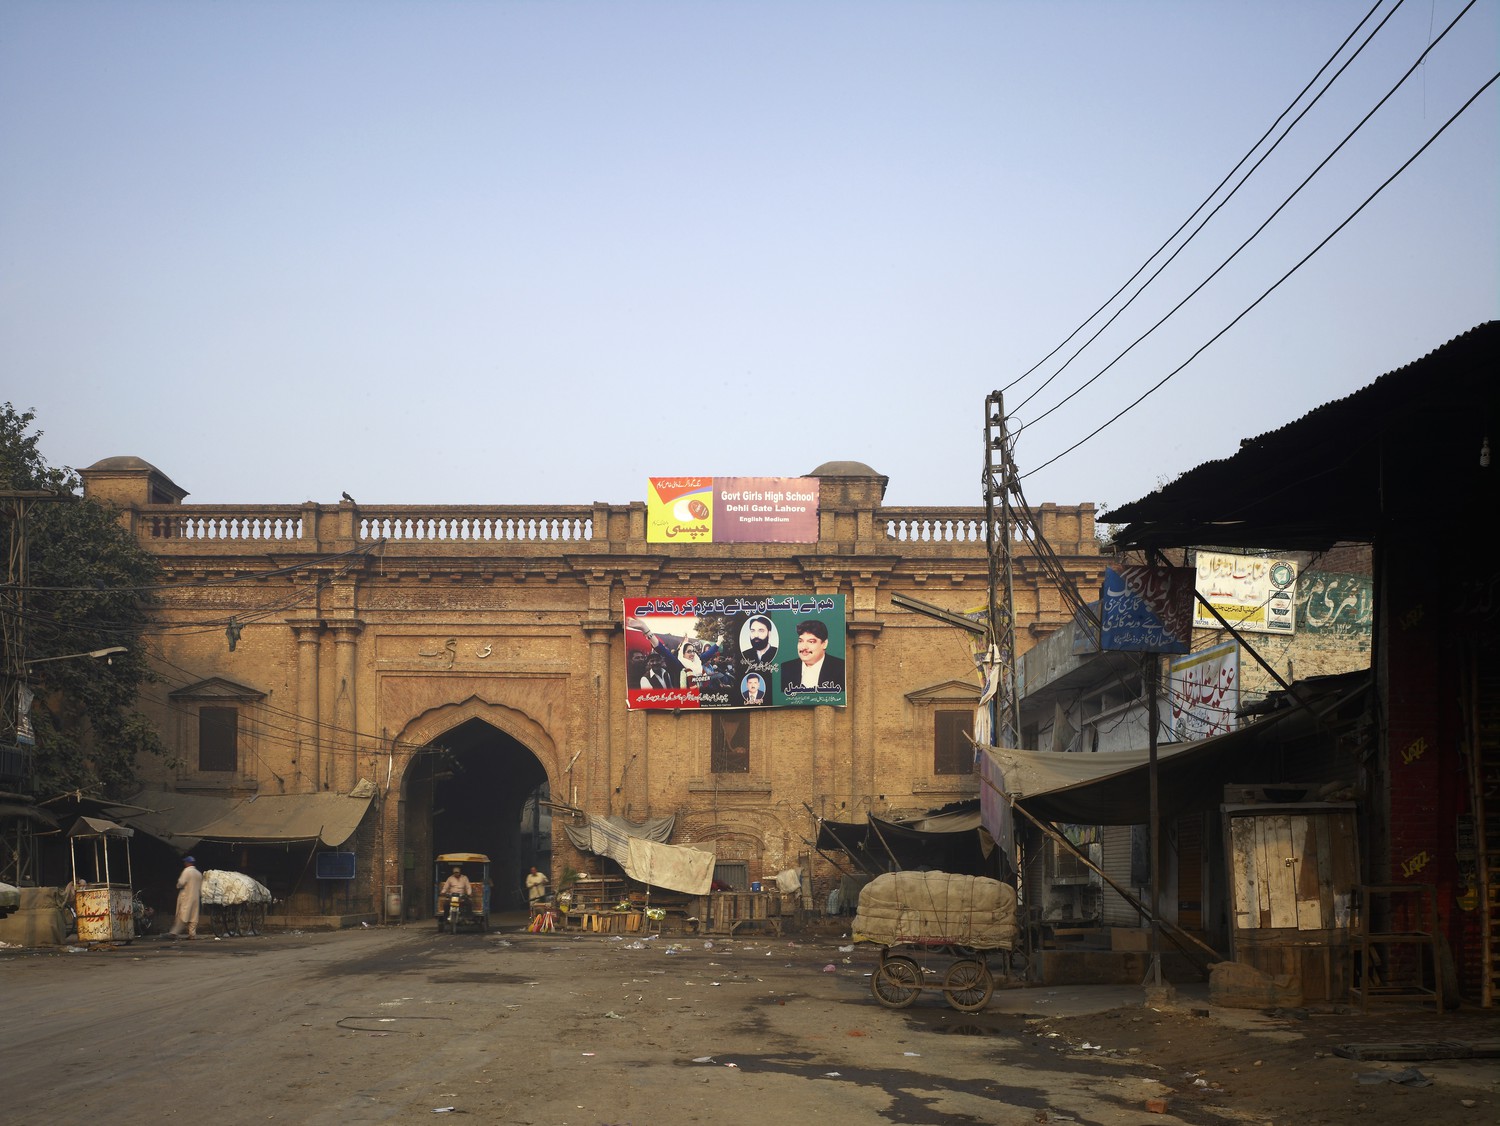 Delhi Gate, one of the thirteen entrances to the Walled City